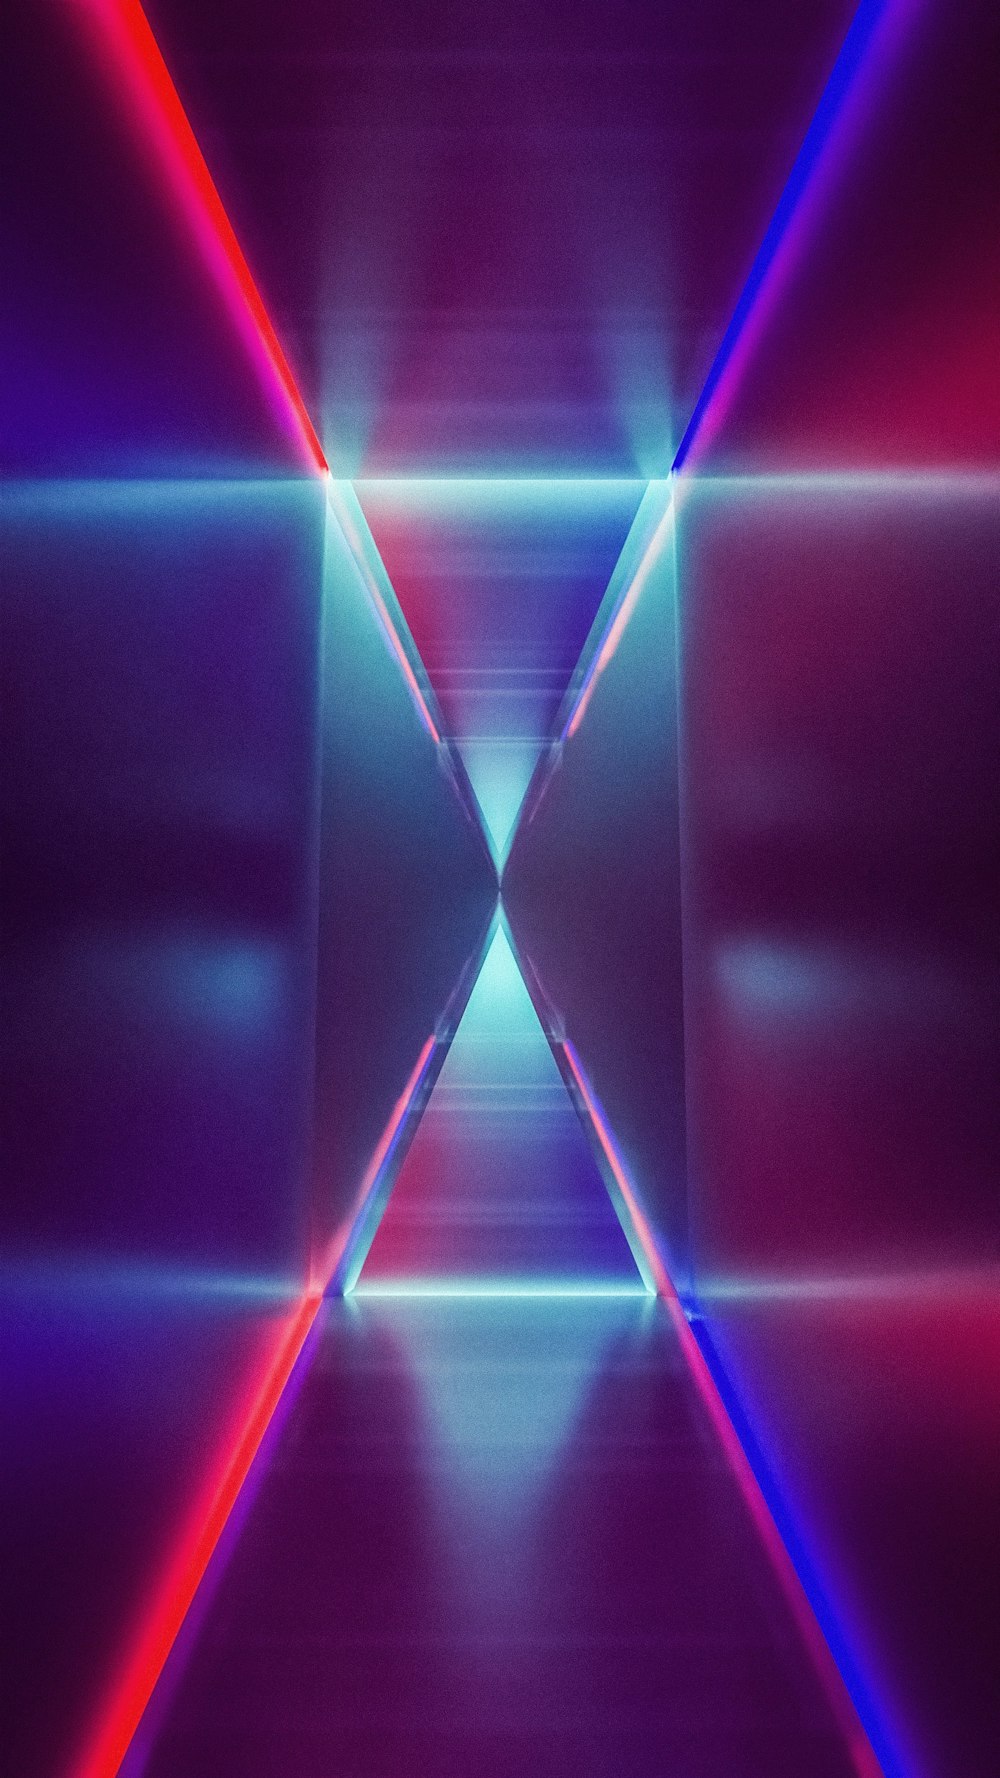 an abstract image of a purple and red light